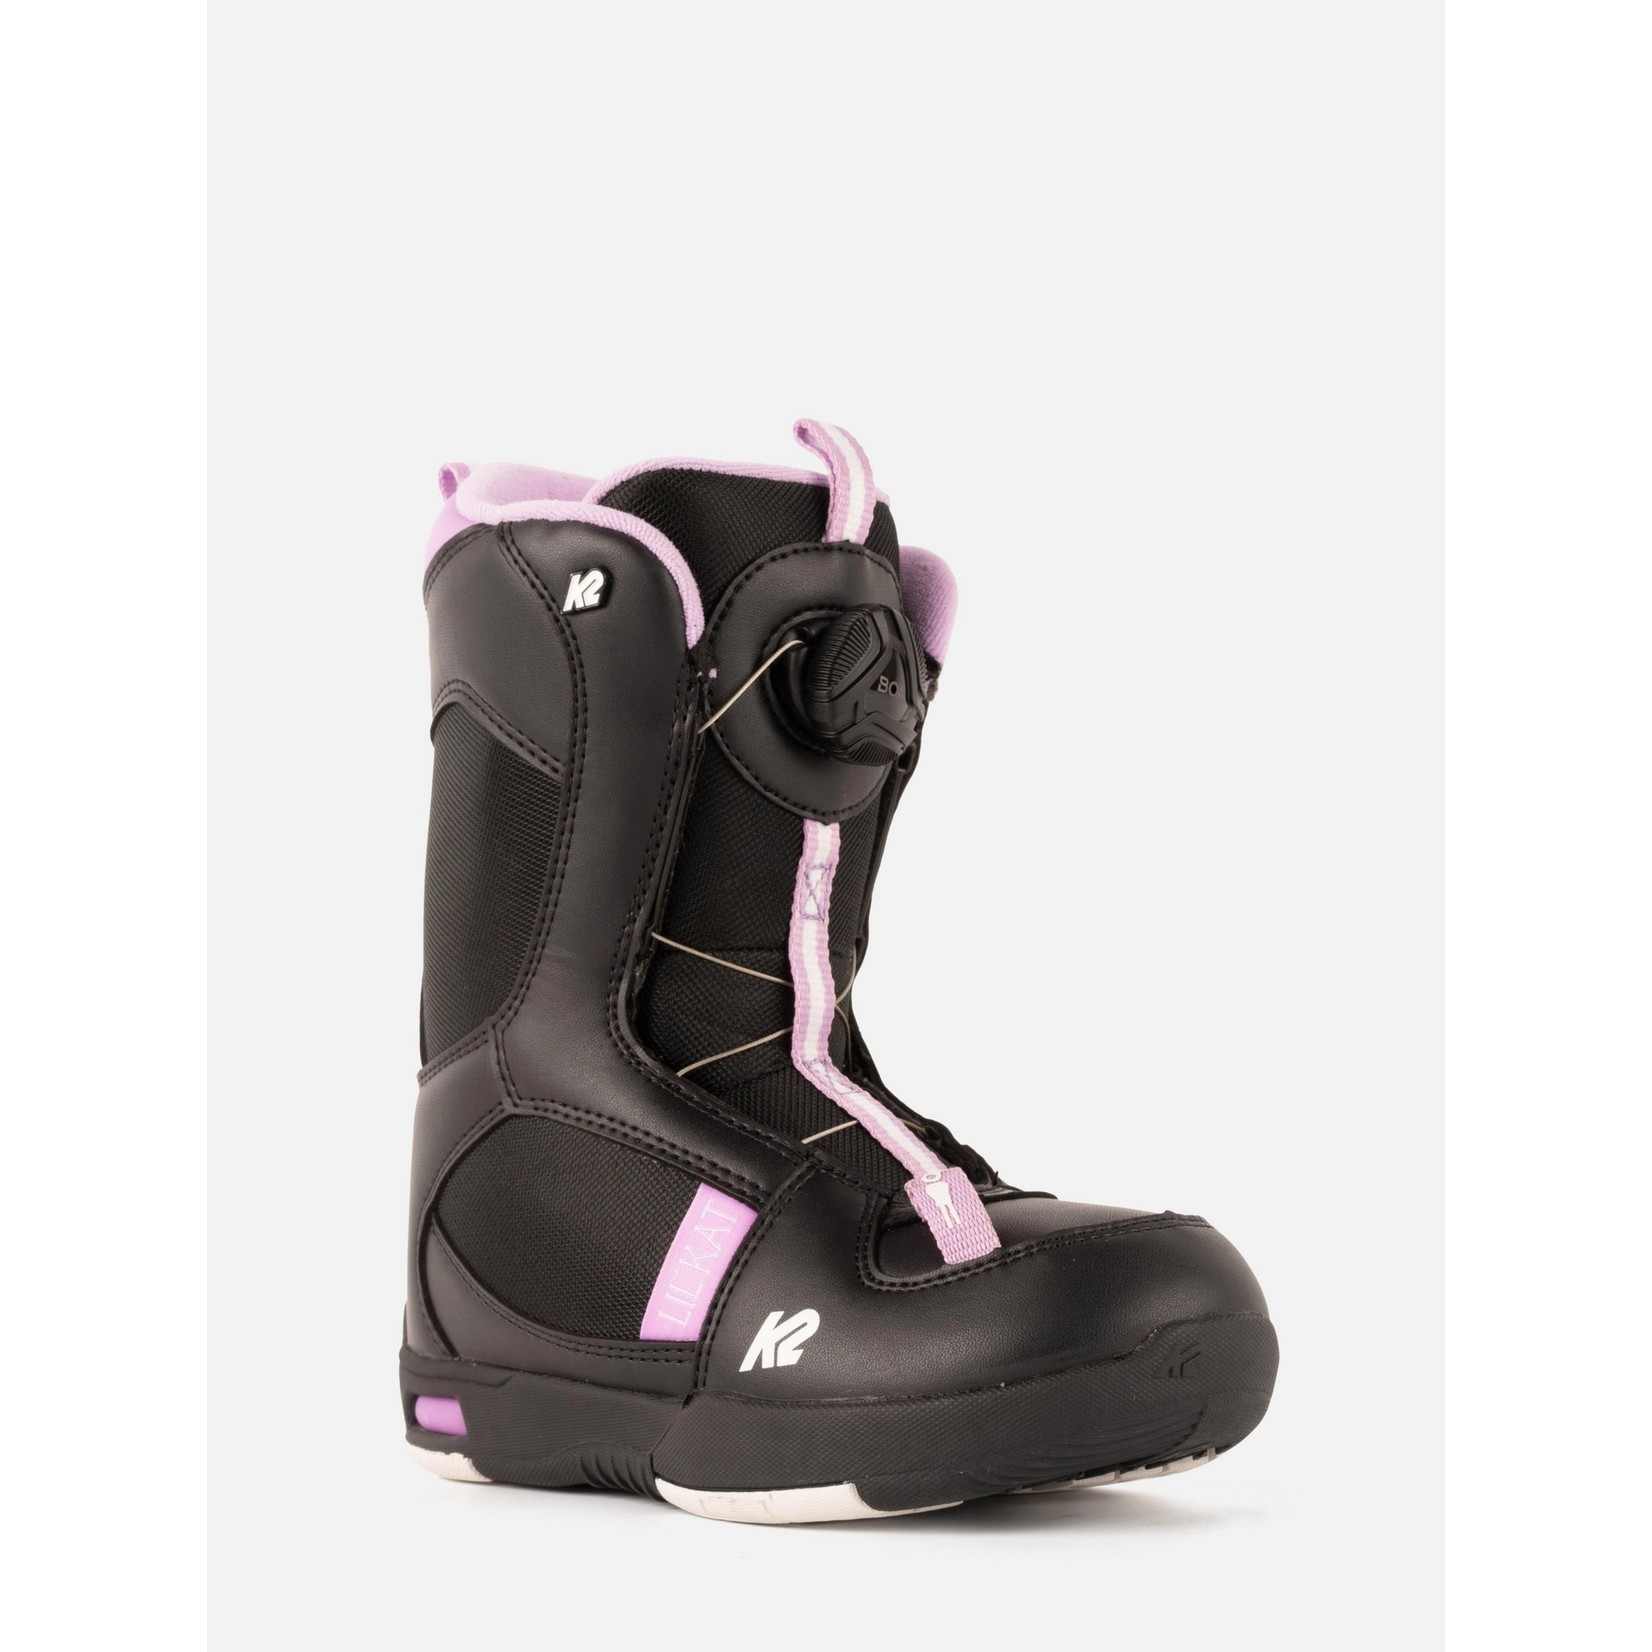 K2 K2 LIL KAT YOUTH SNOWBOARD BOOTS